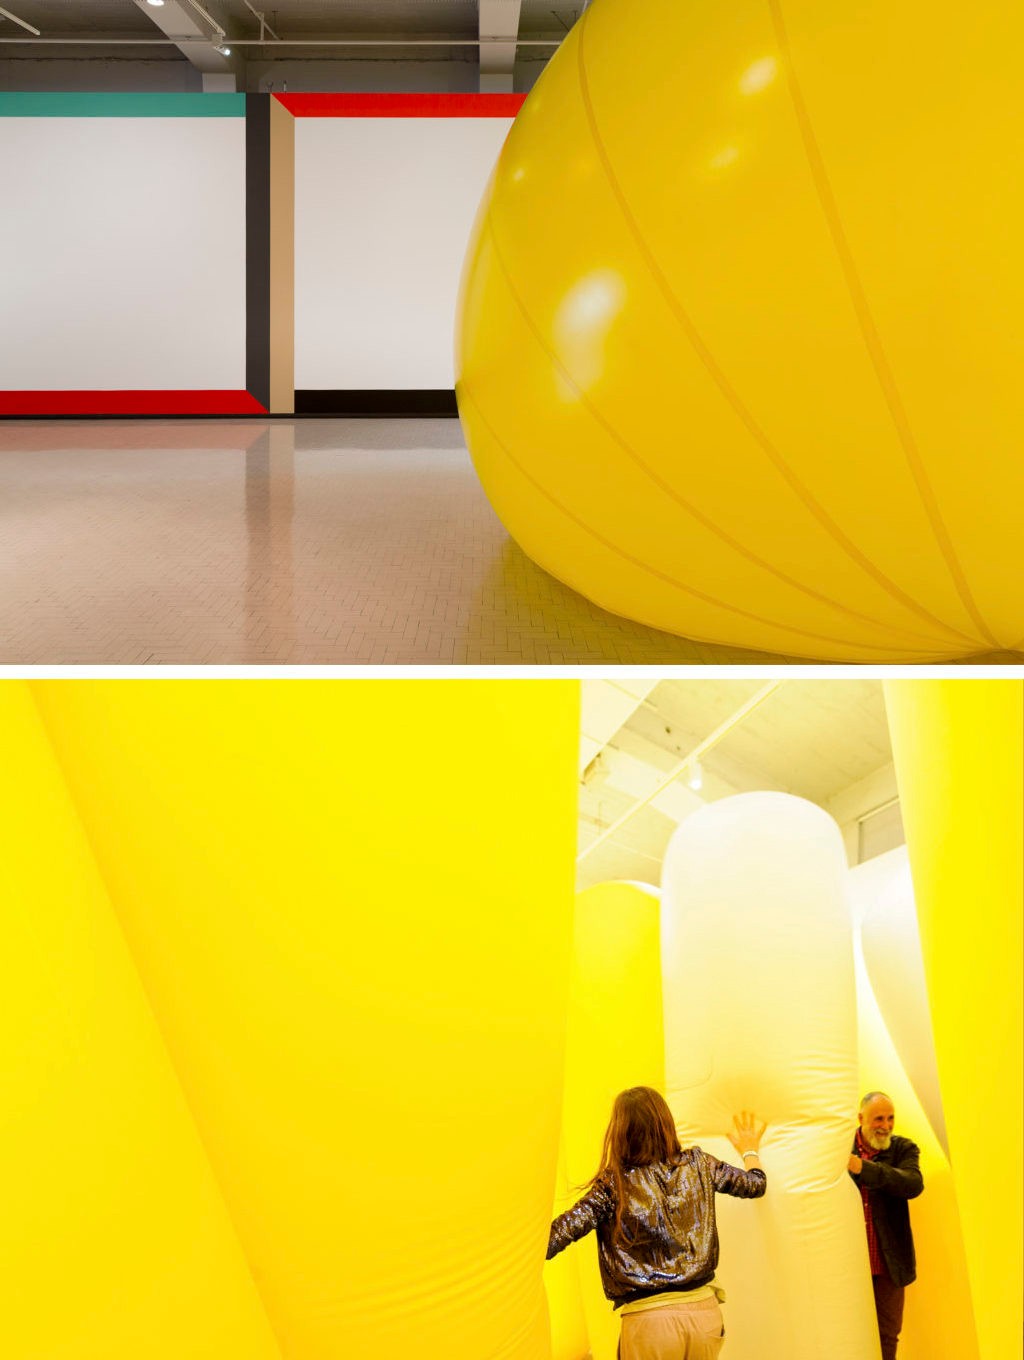 Bright yellow inflatable shapes fill an art gallery from floor to ceiling while visitors move through them.